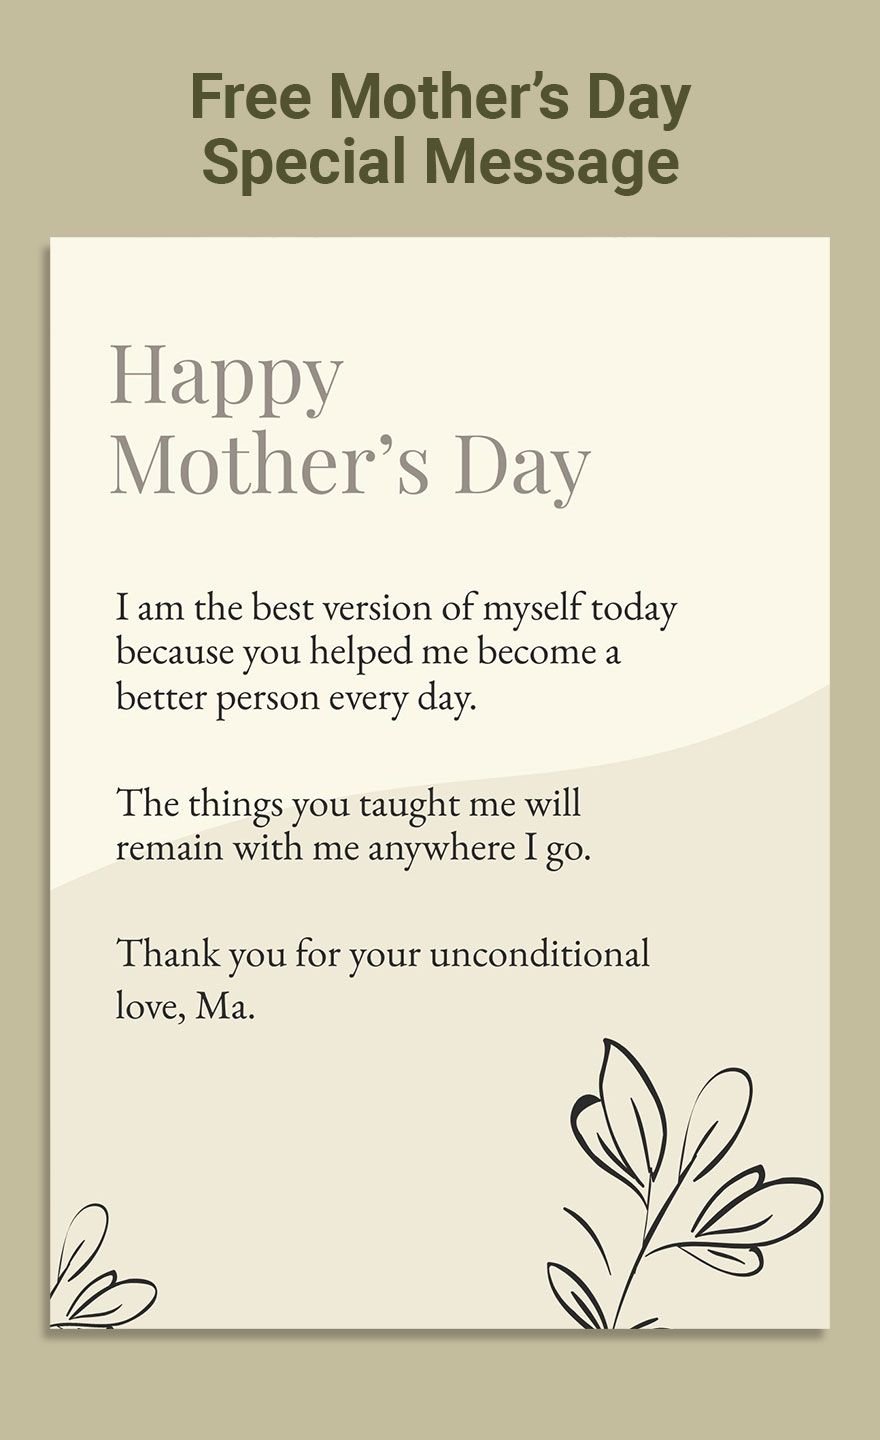 Mother's Day Special Message